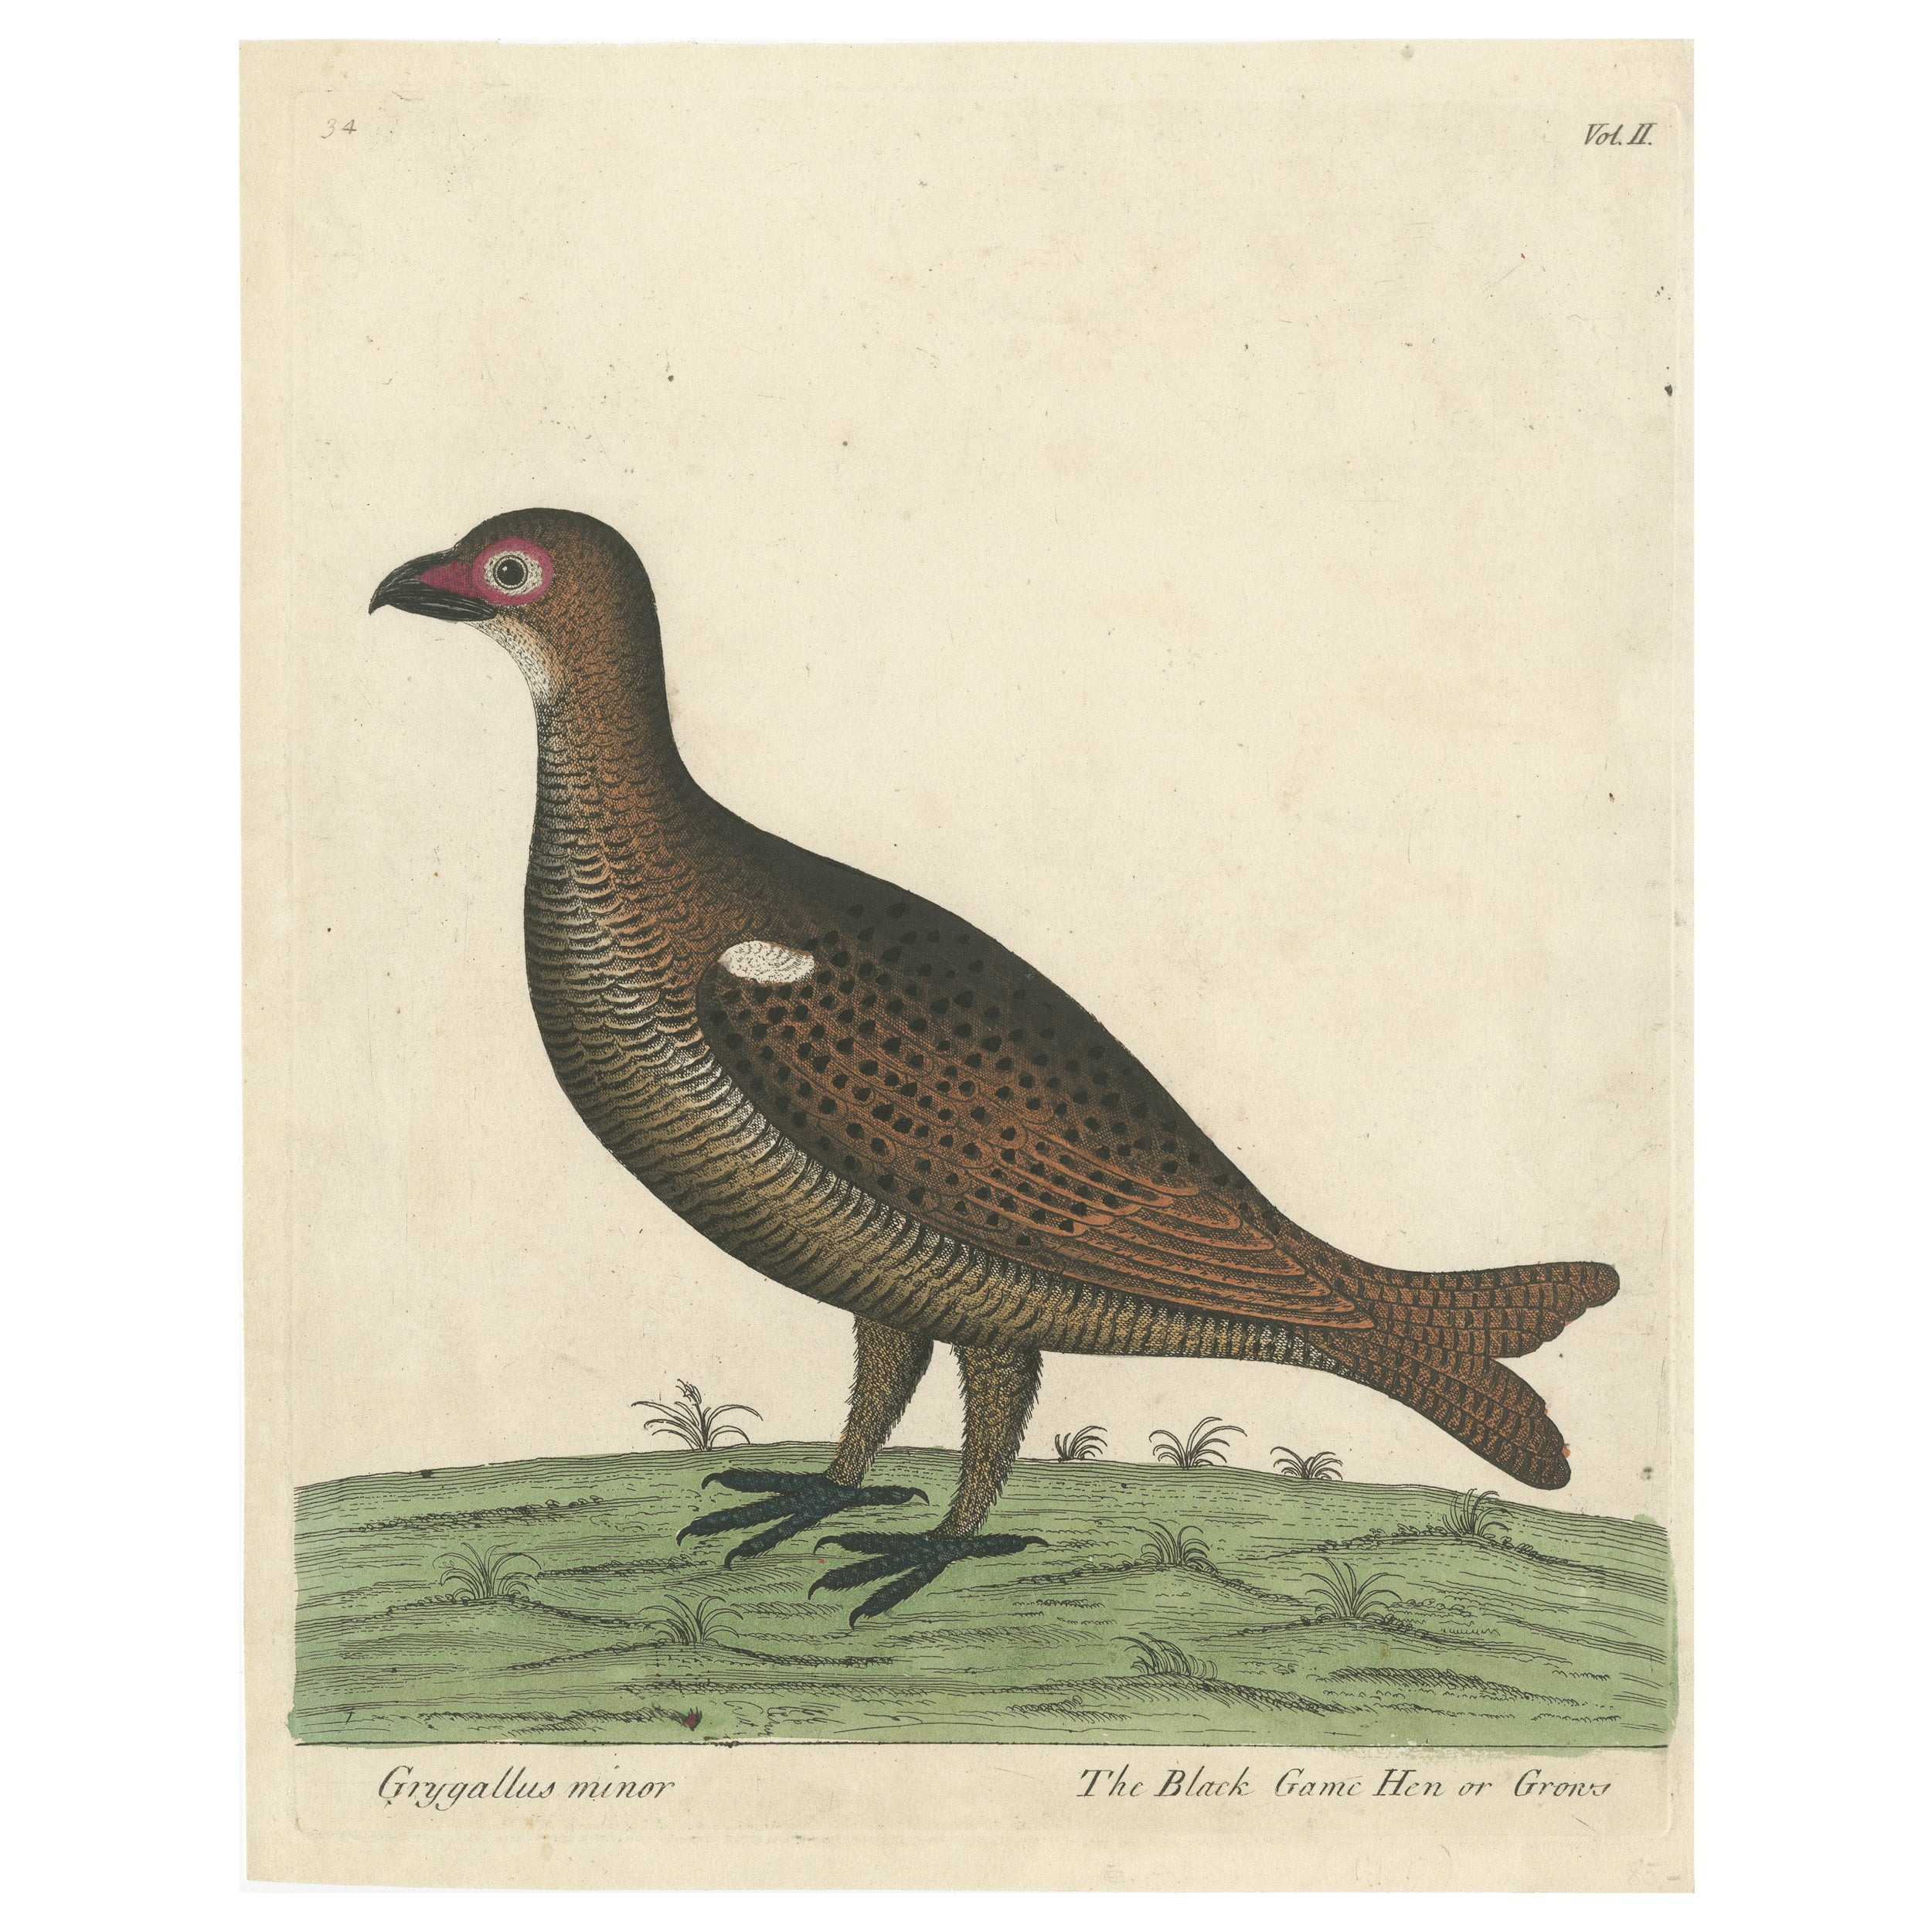 Hand Colored Antique Print of a Black Game Hen or Grouse